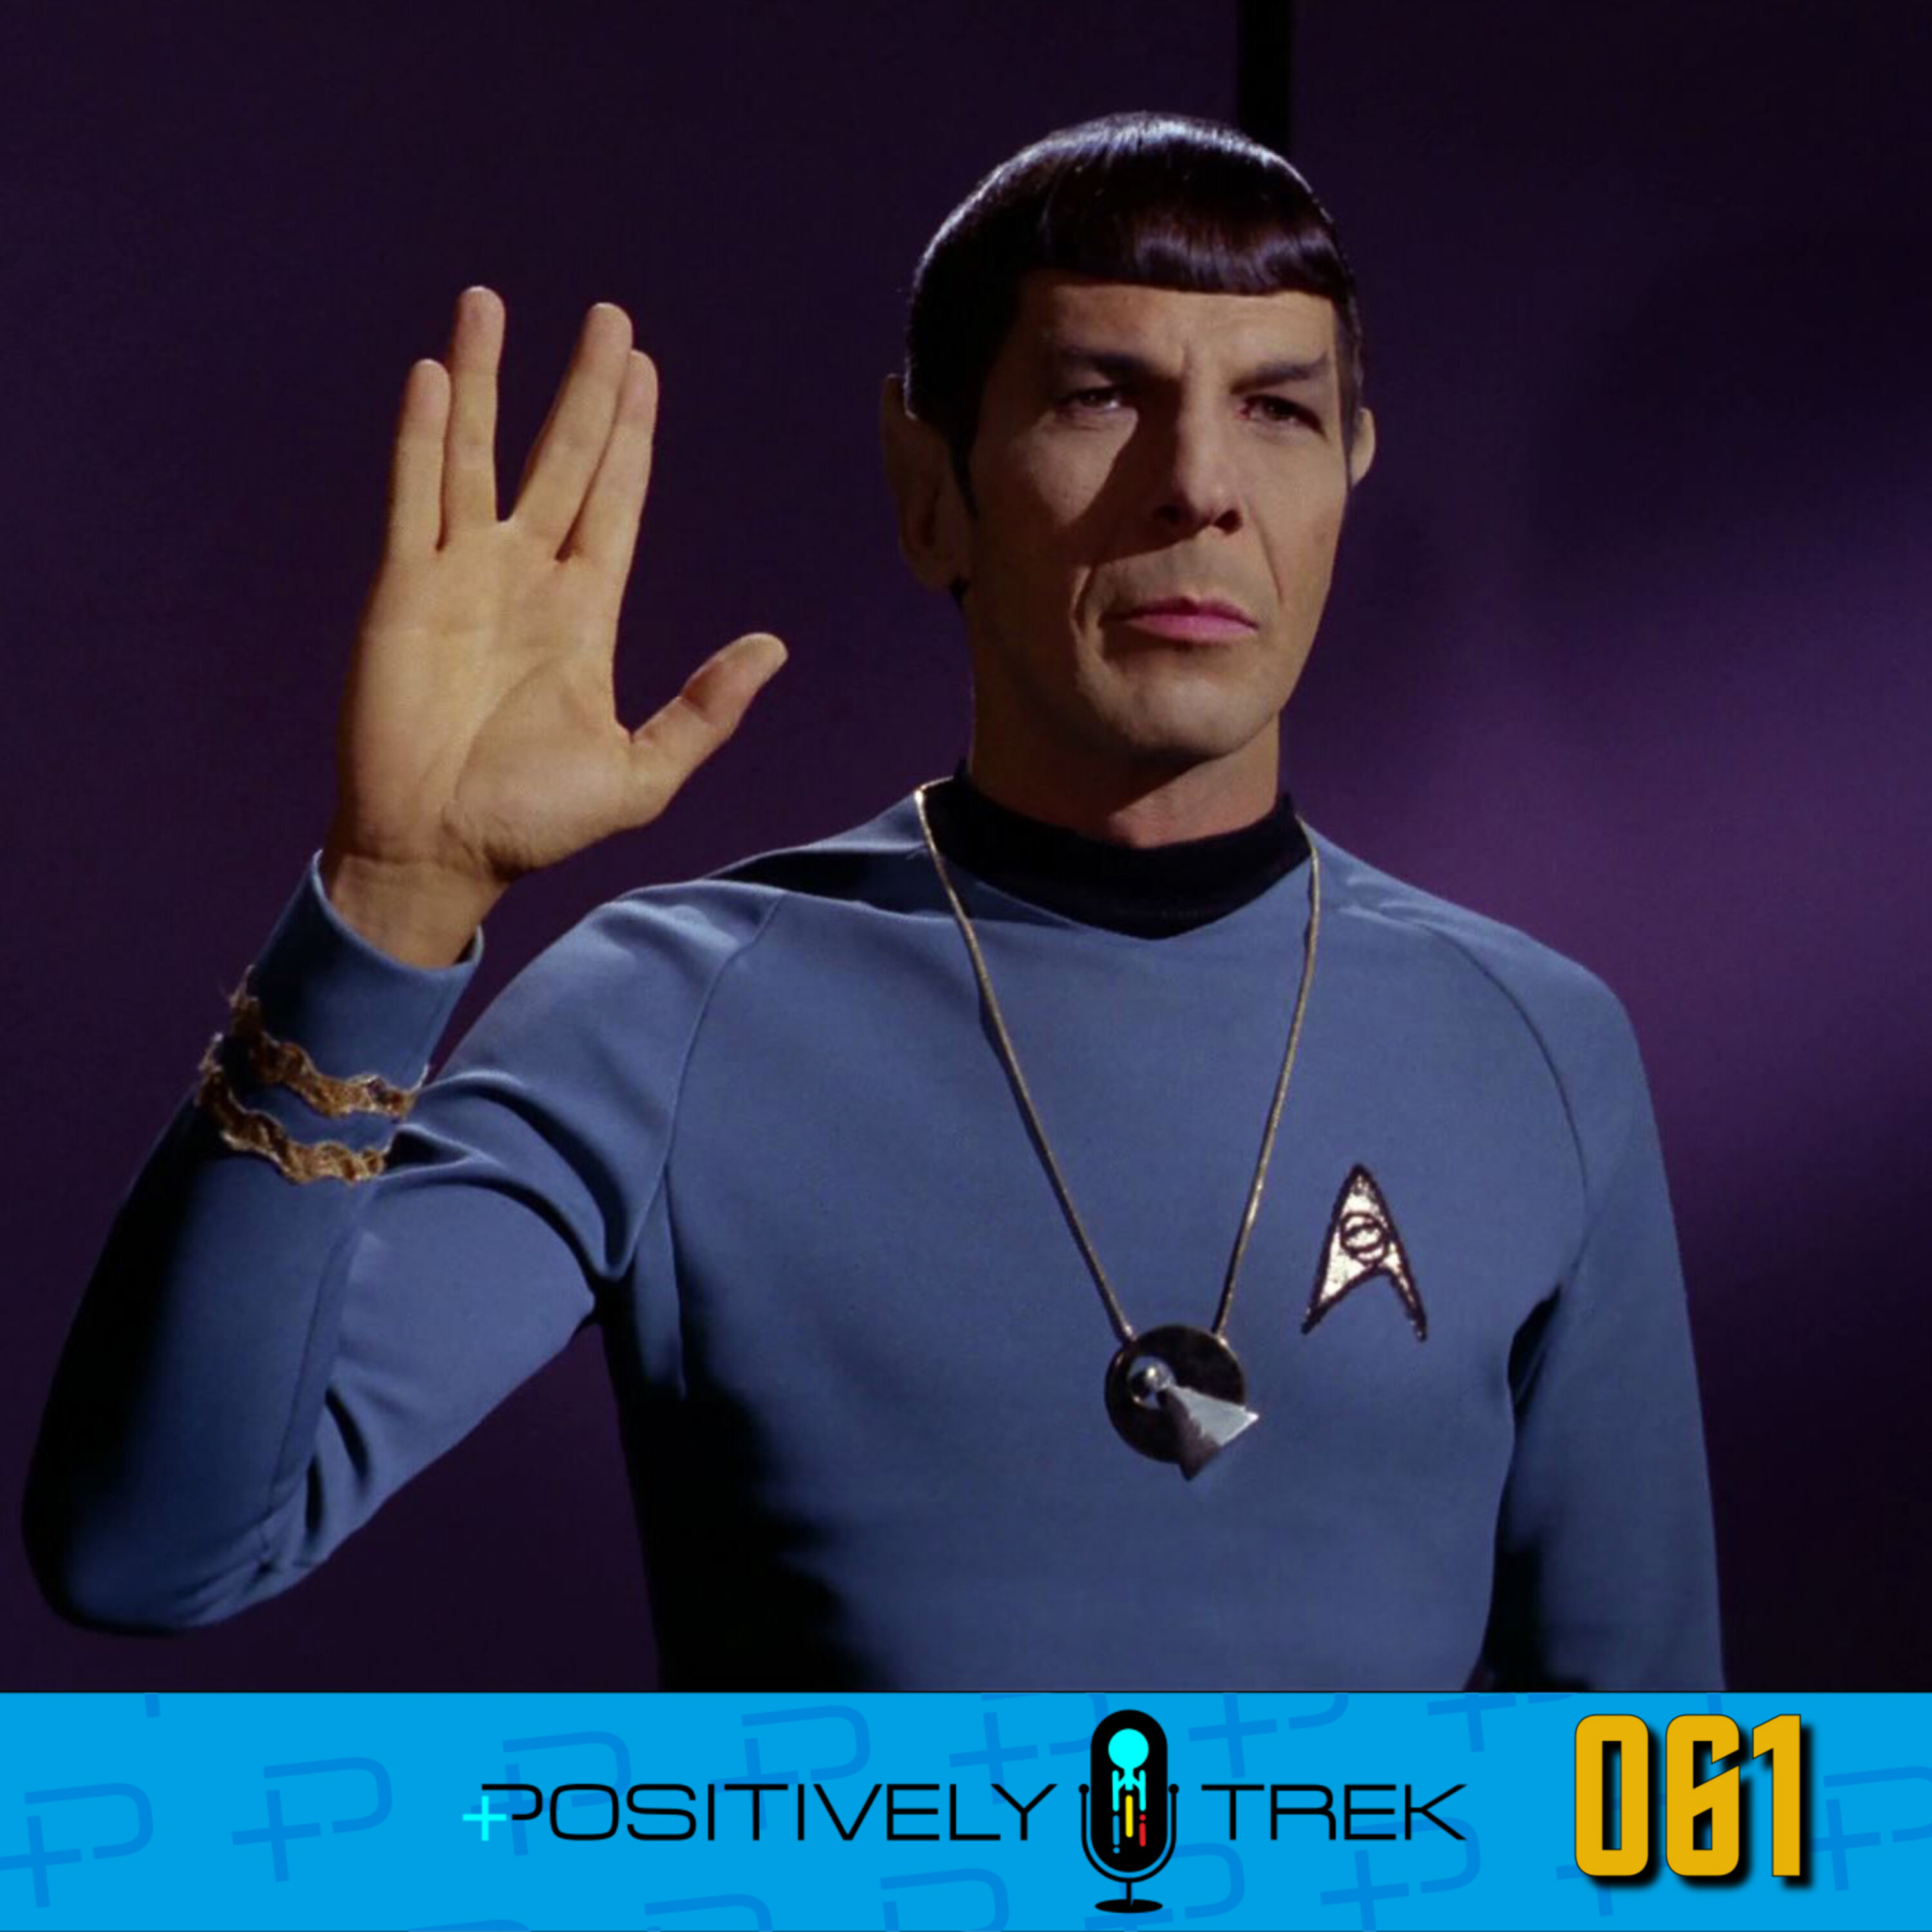 What Do Discovery, Jeopardy, Janeway, & Badgey Have in Common? Image